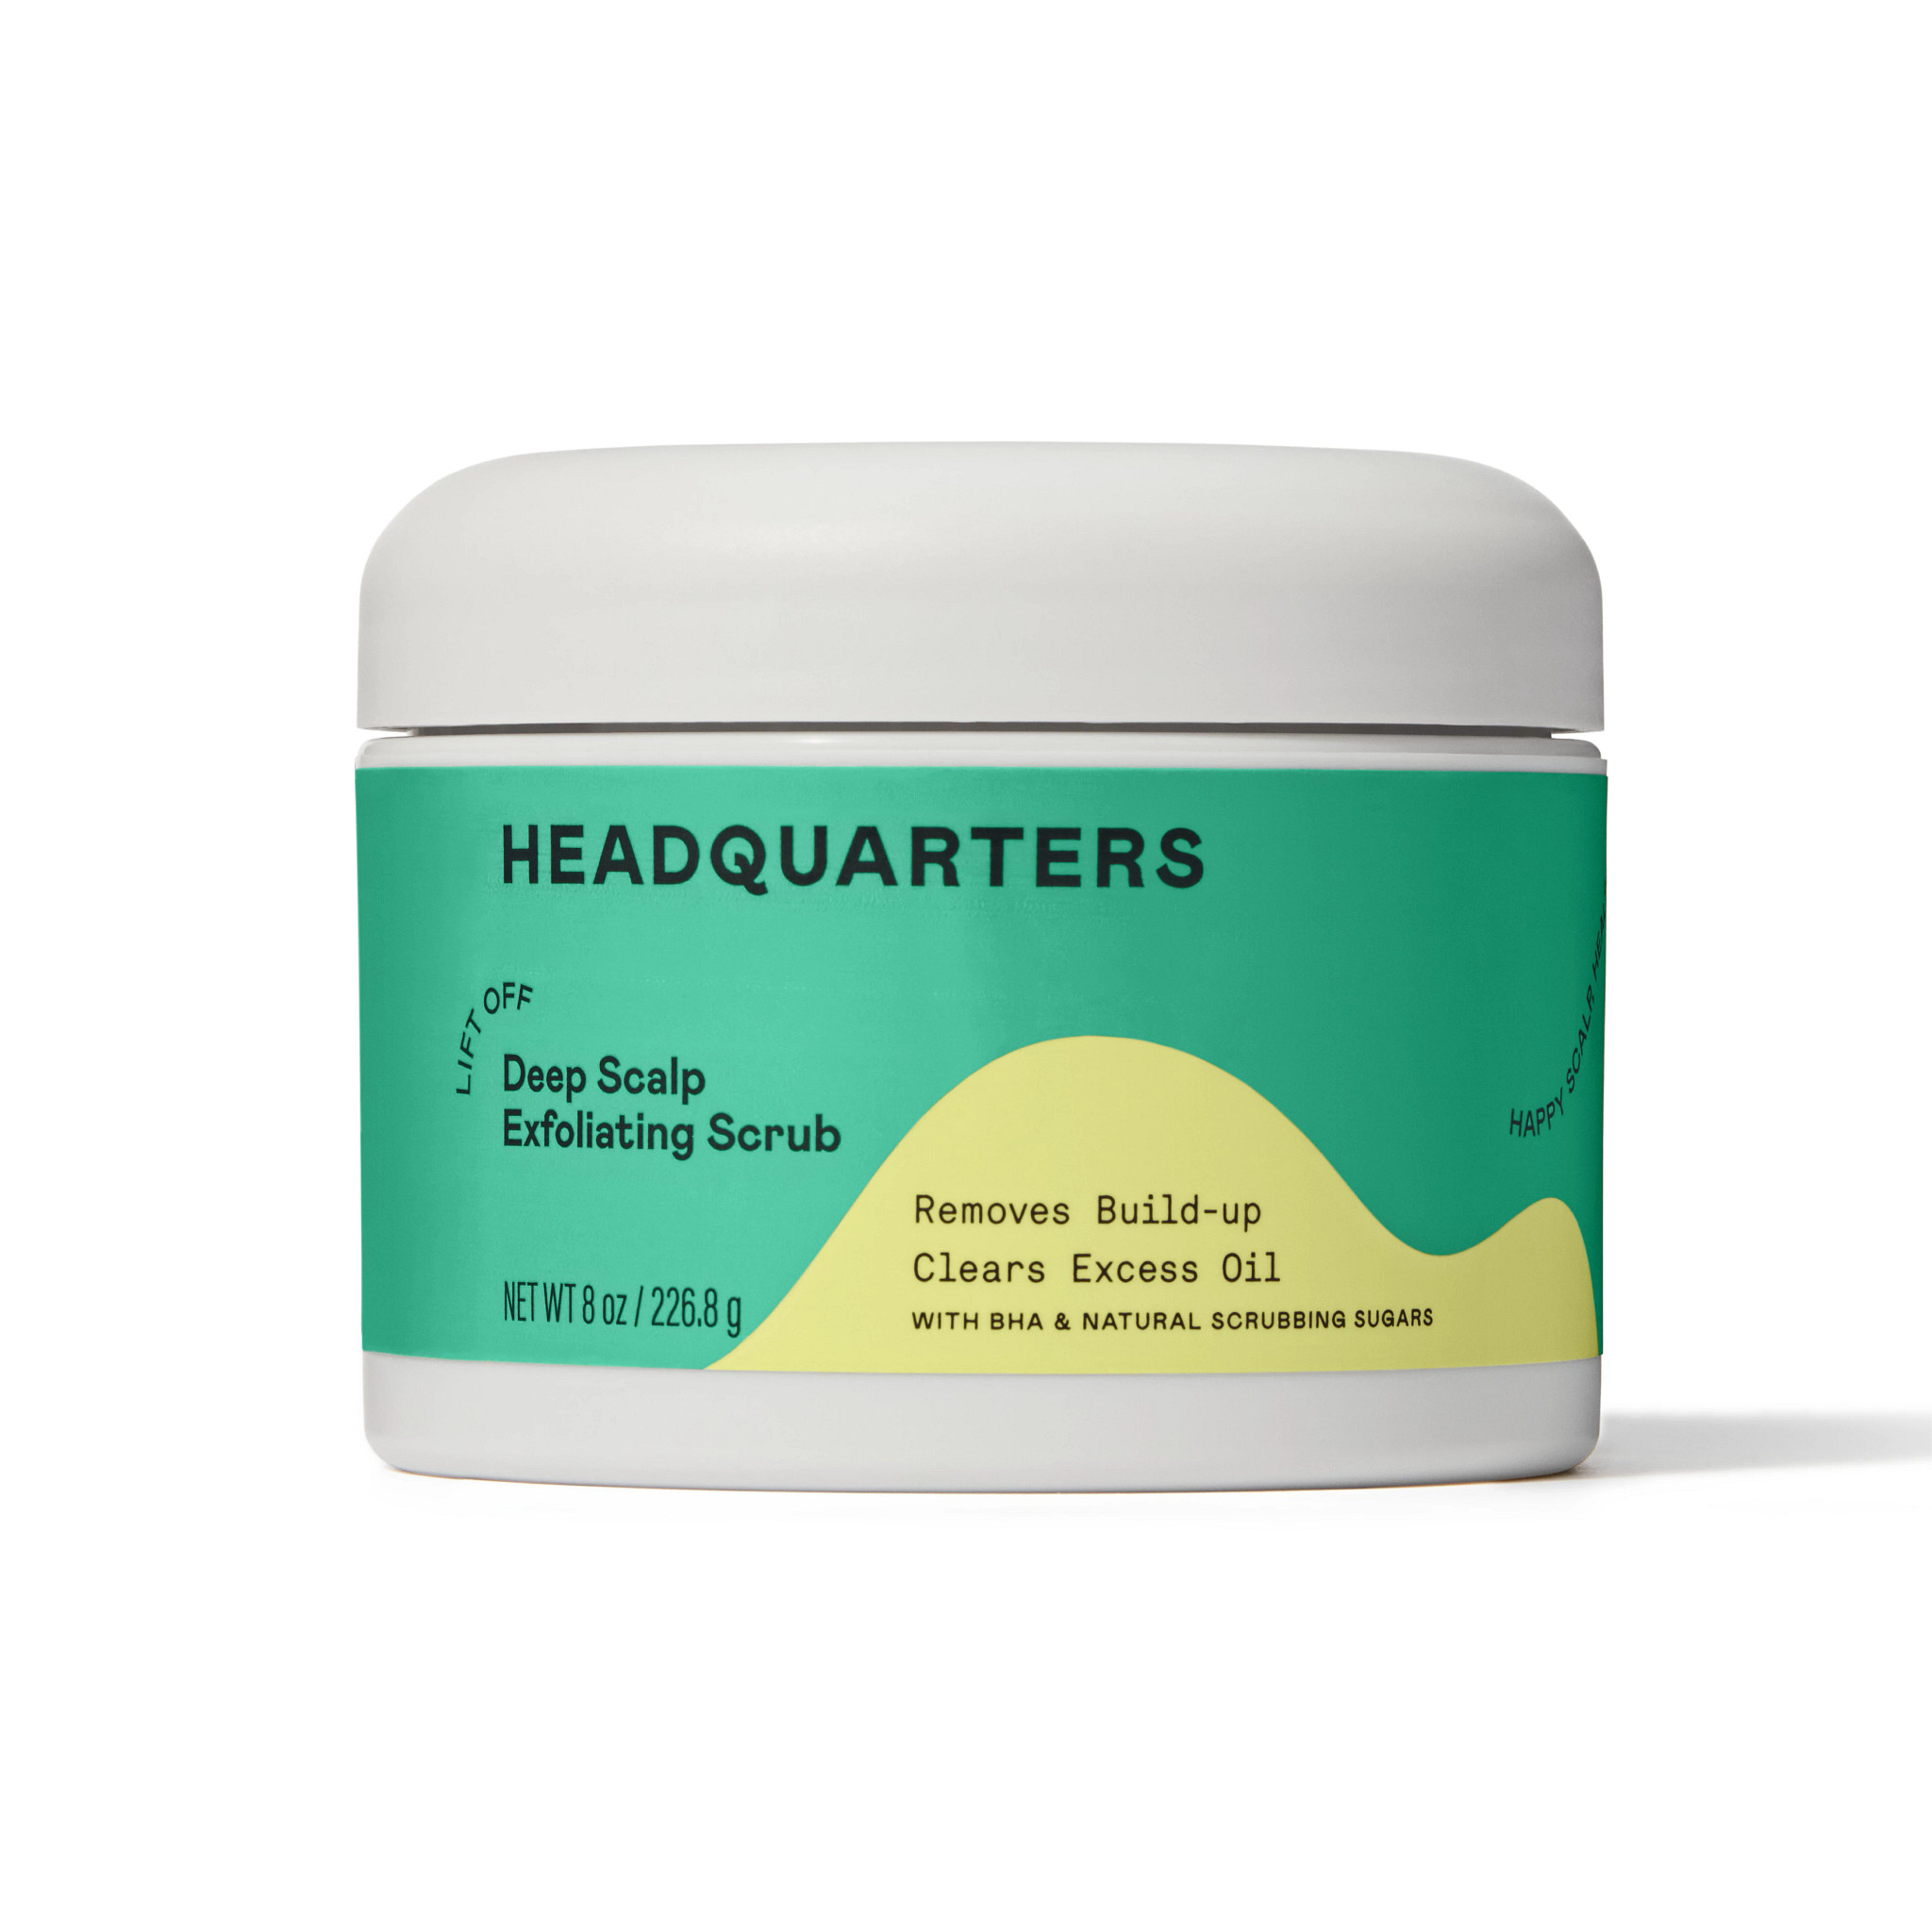 Headquarters Deep Scalp Exfoliating Scrub for Oily Scalp and Hair, Net wt 8 oz / 226.8 g - image 1 of 12